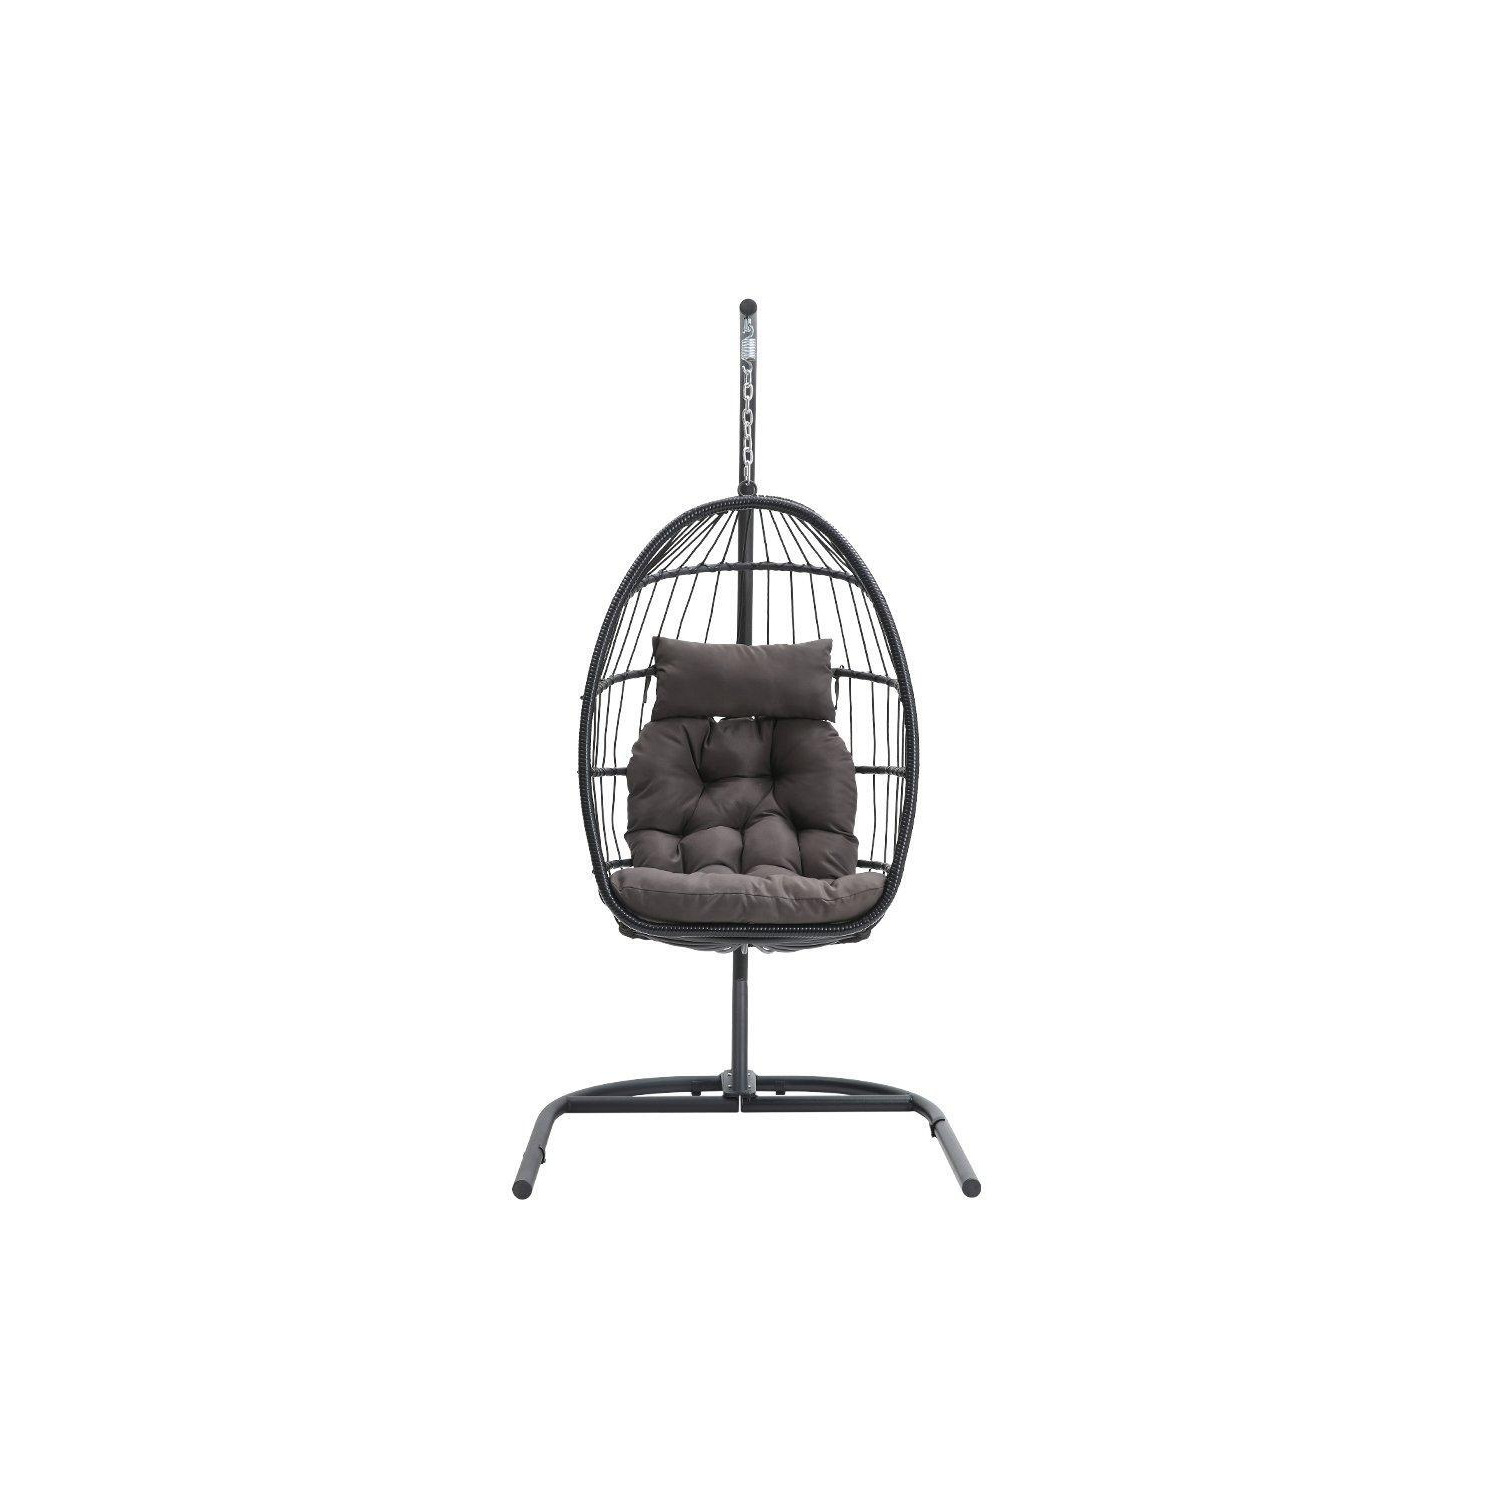 Outdoor Hanging Egg-Shaped Chair - image 1